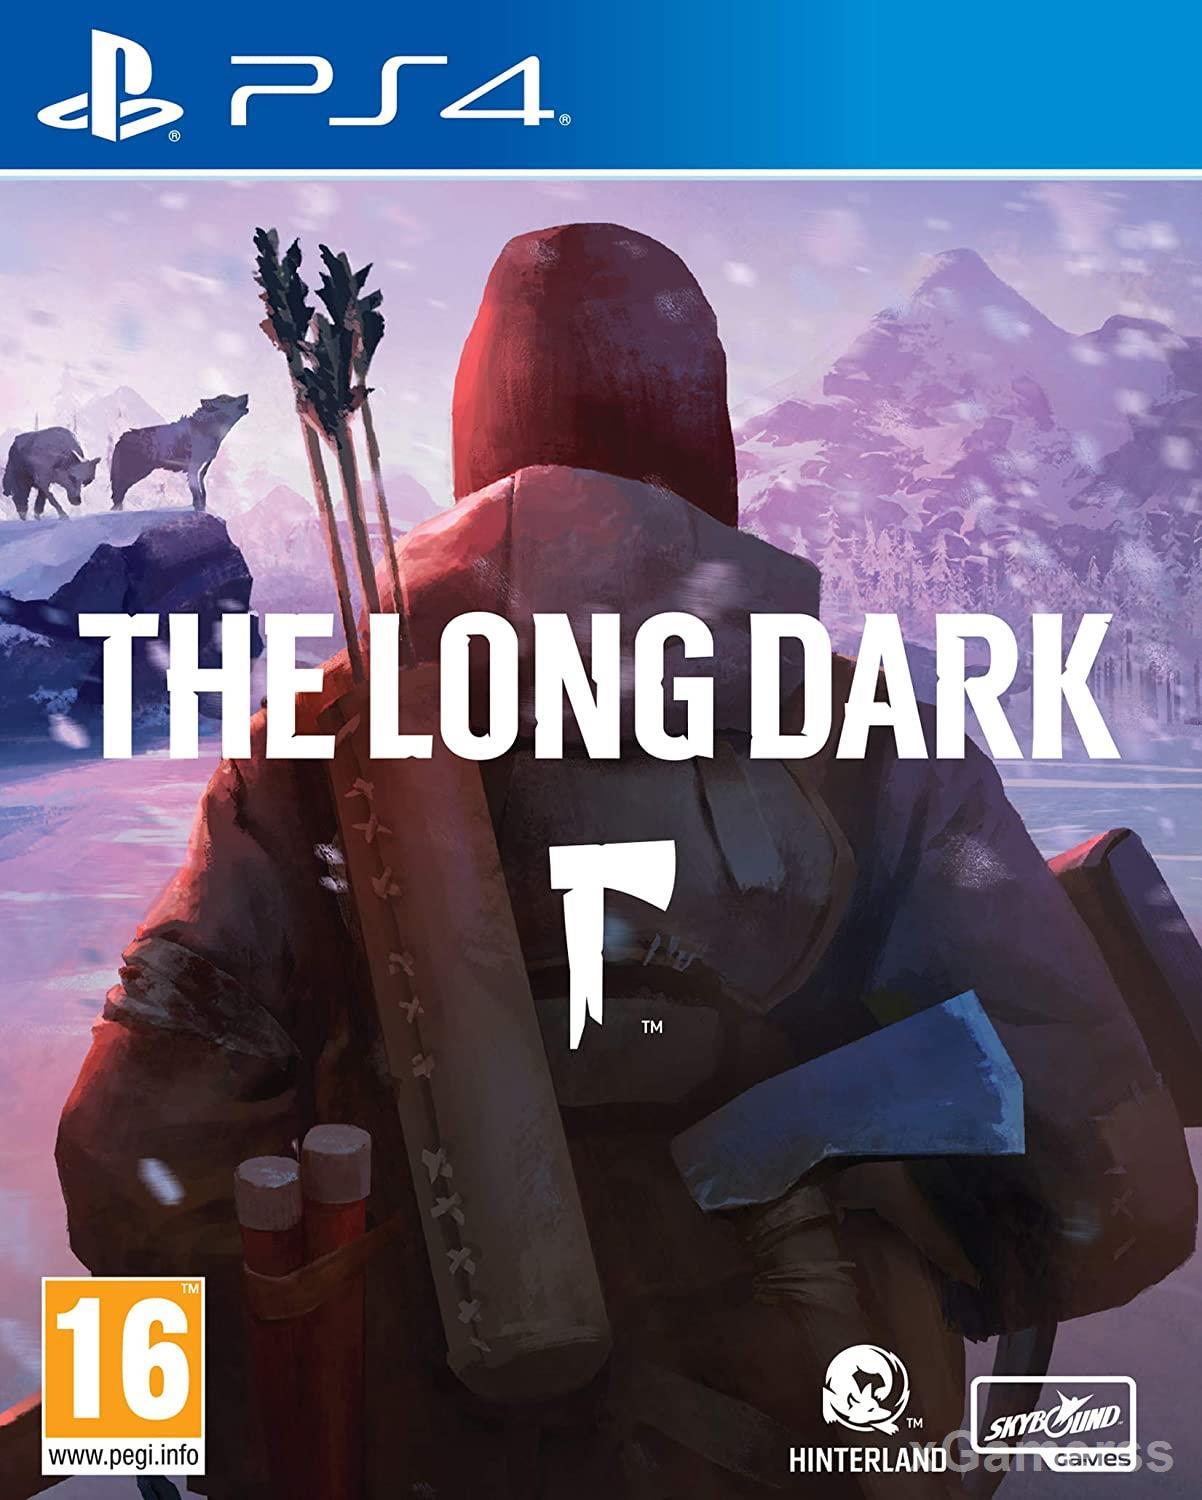 The long dark - a survival based open world